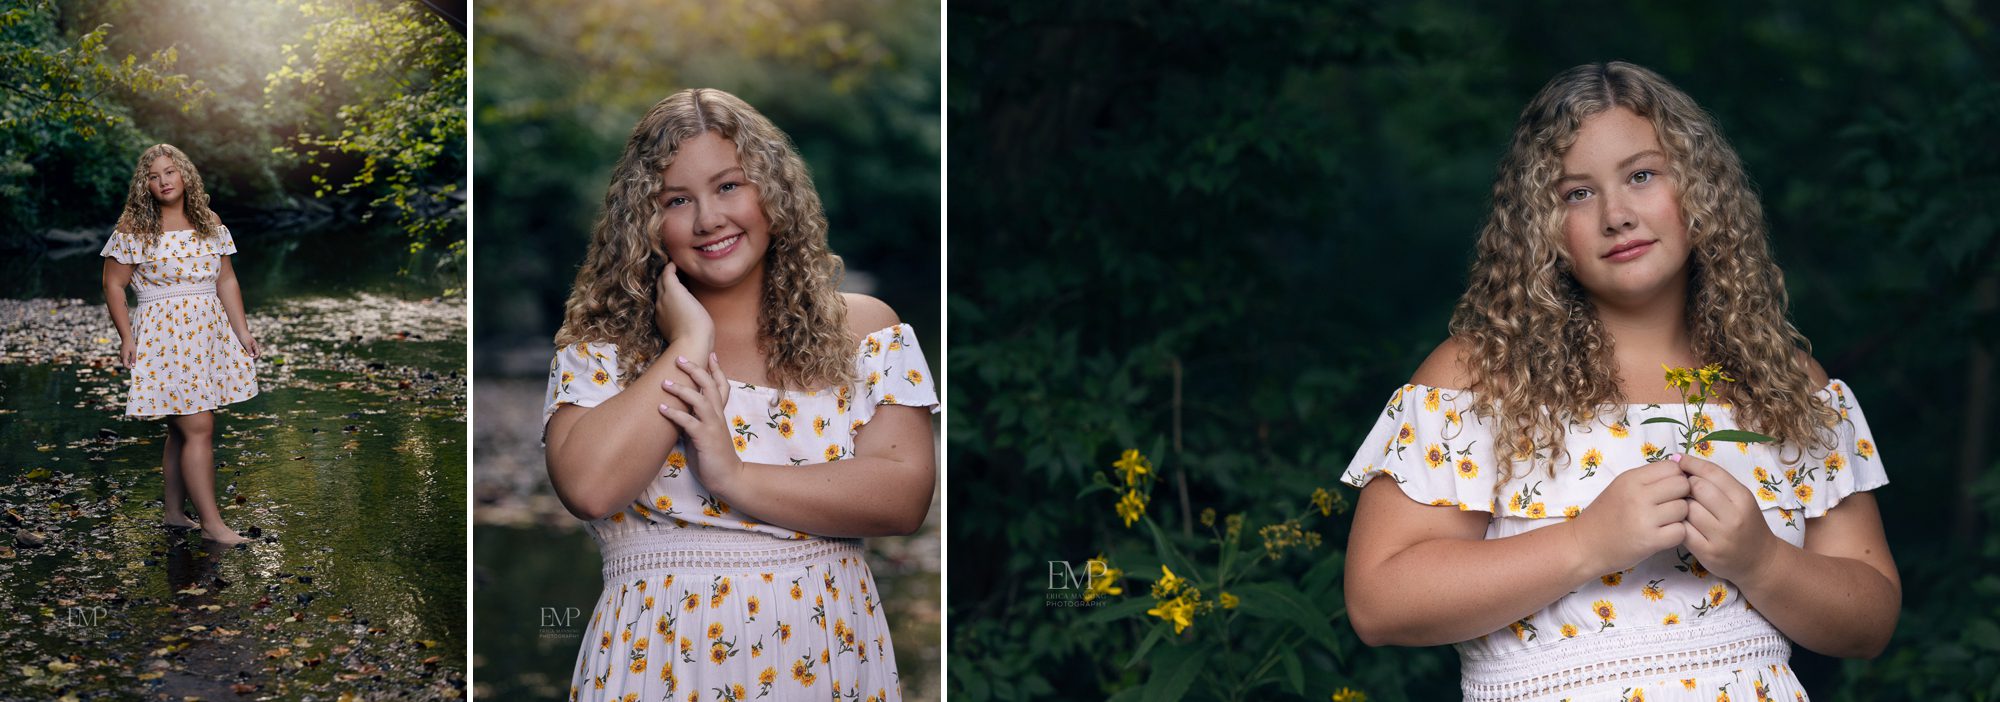 High school senior girl with curly hair in yellow flower dress wading in creek